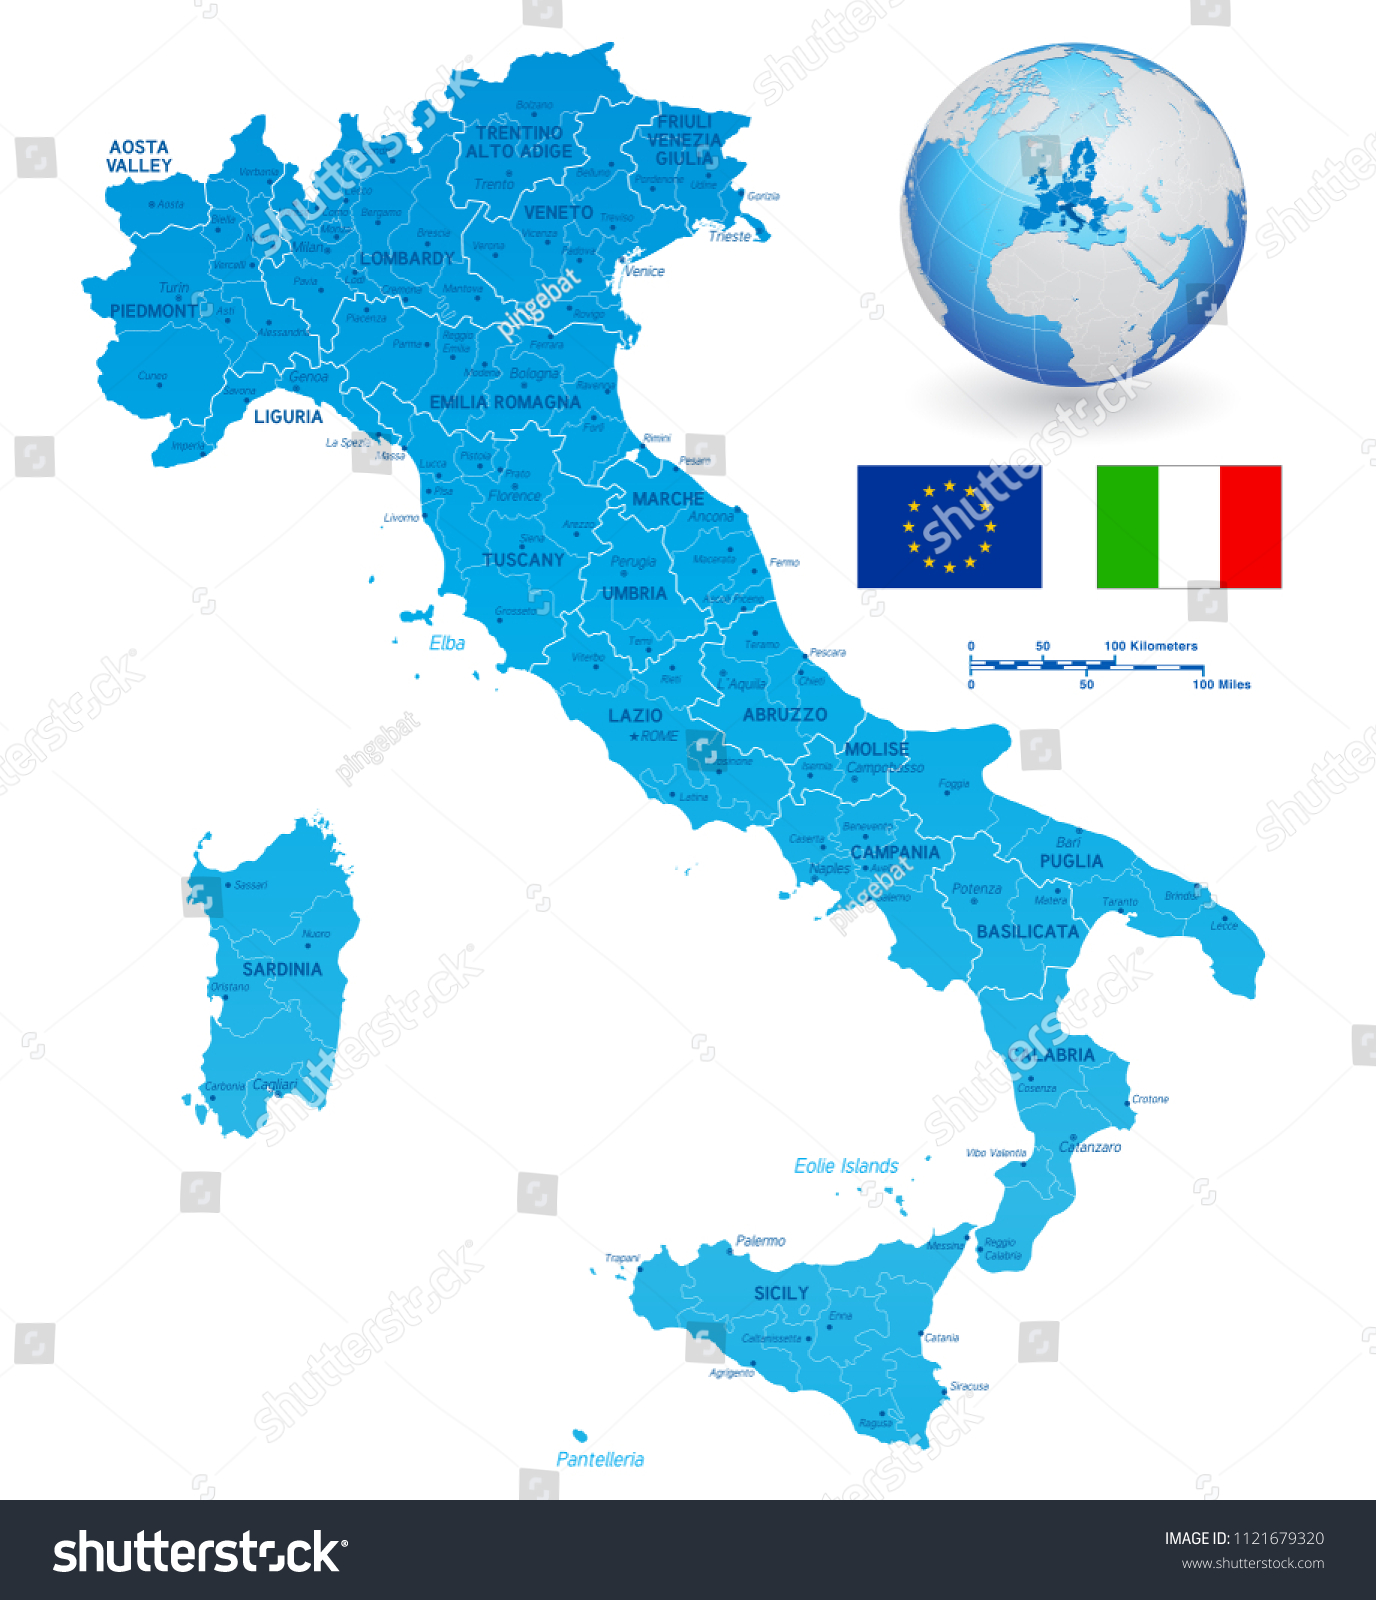 Stock Vector Vector Political Map Of Italy With Full Region And Provinces Boundaries Completed With Flags And A 1121679320 